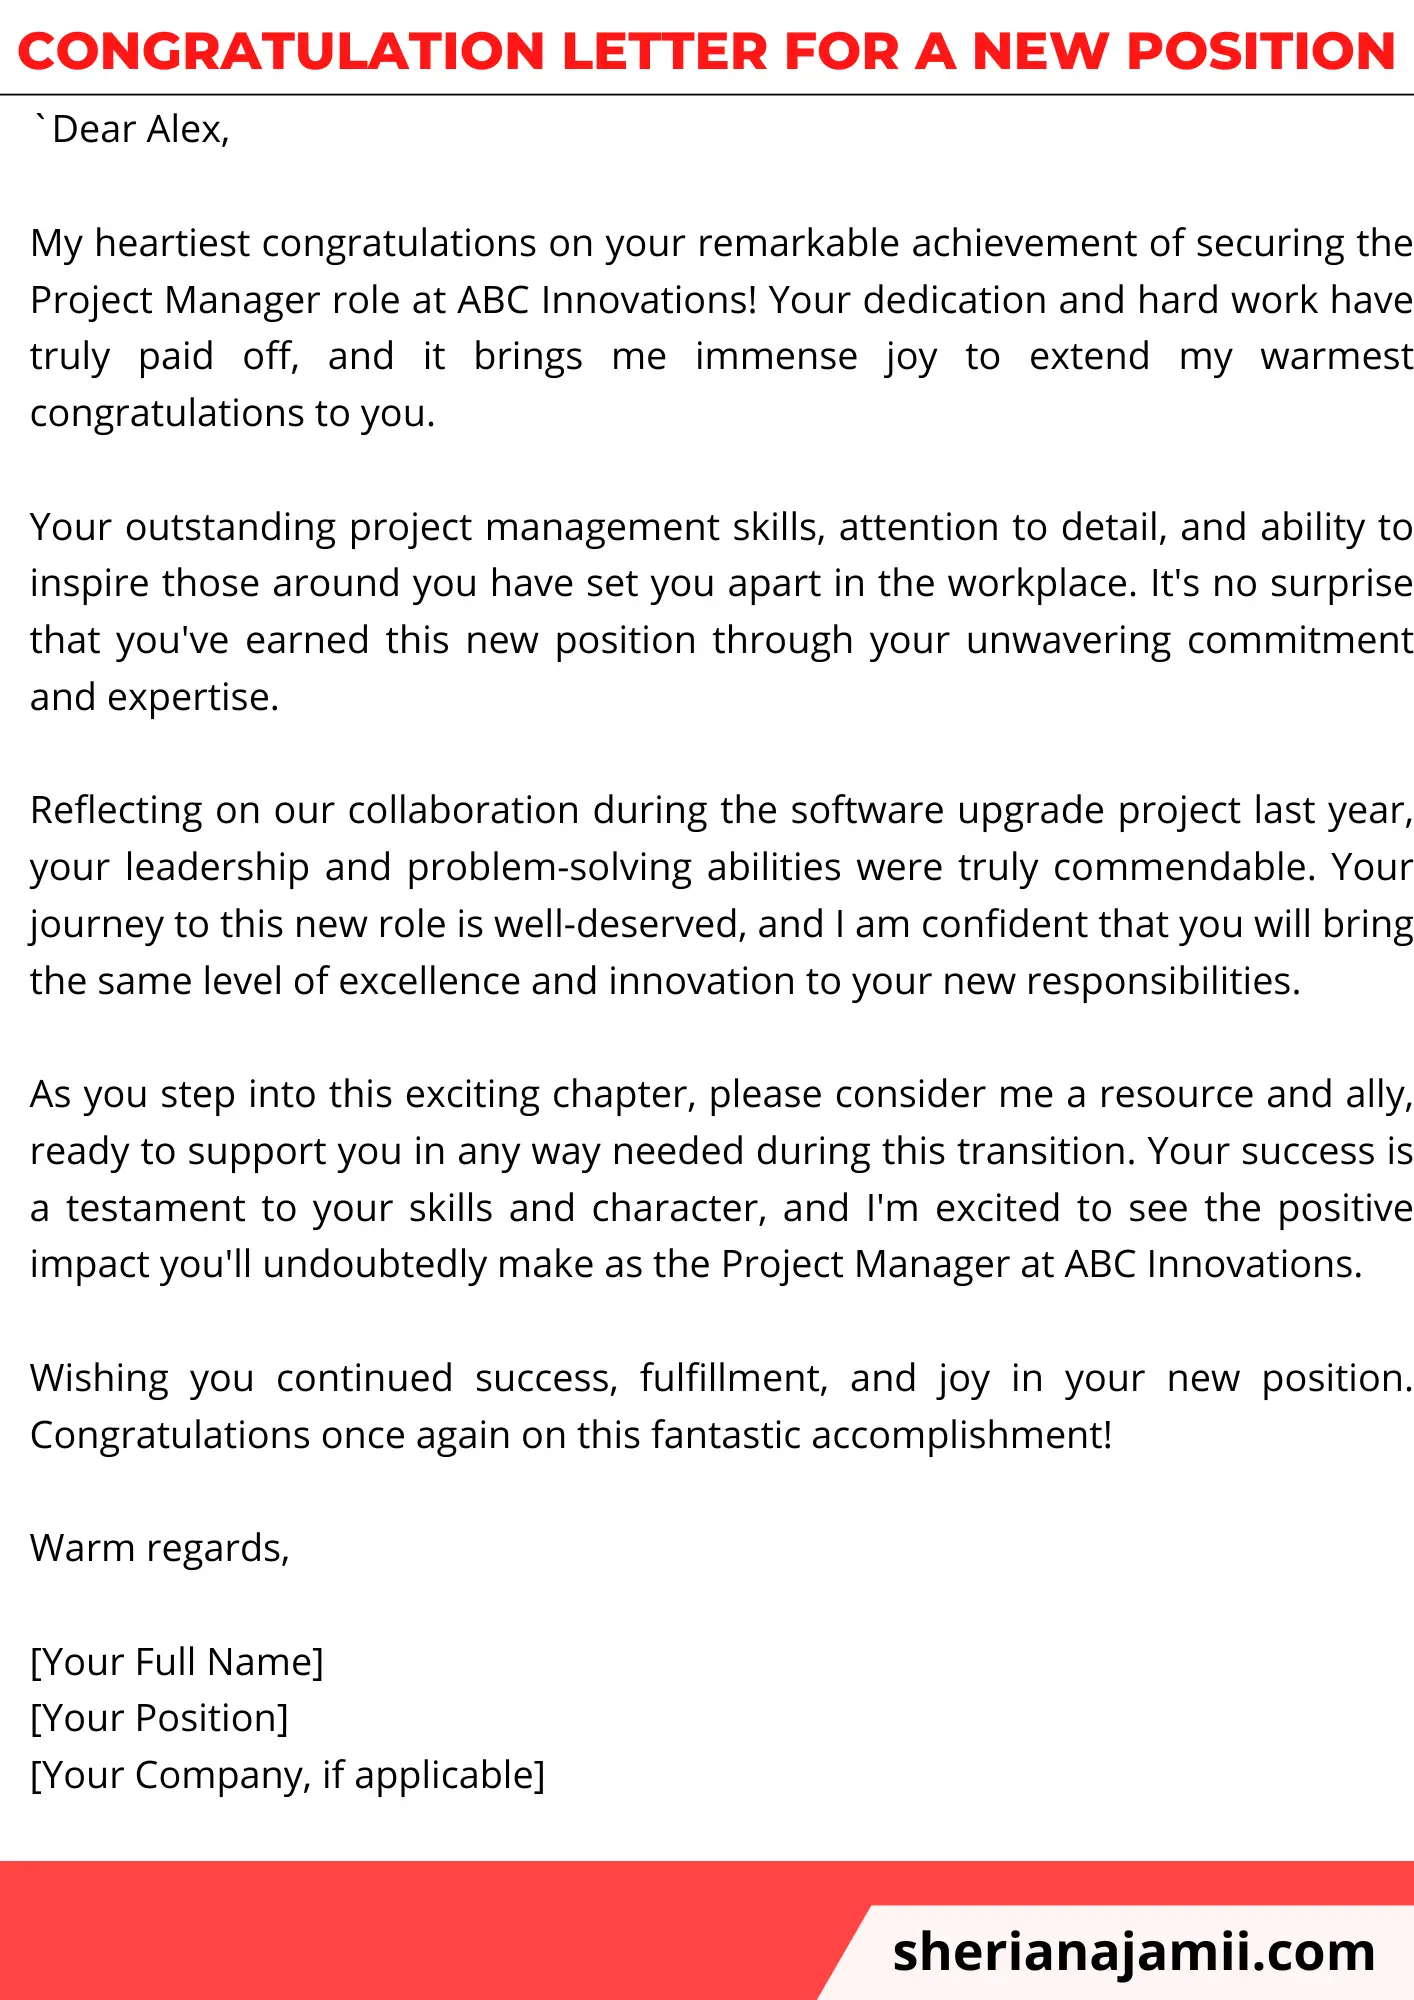 congratulation letter for a new position, congratulation letter for a new position sample, congratulation letter for a new position template